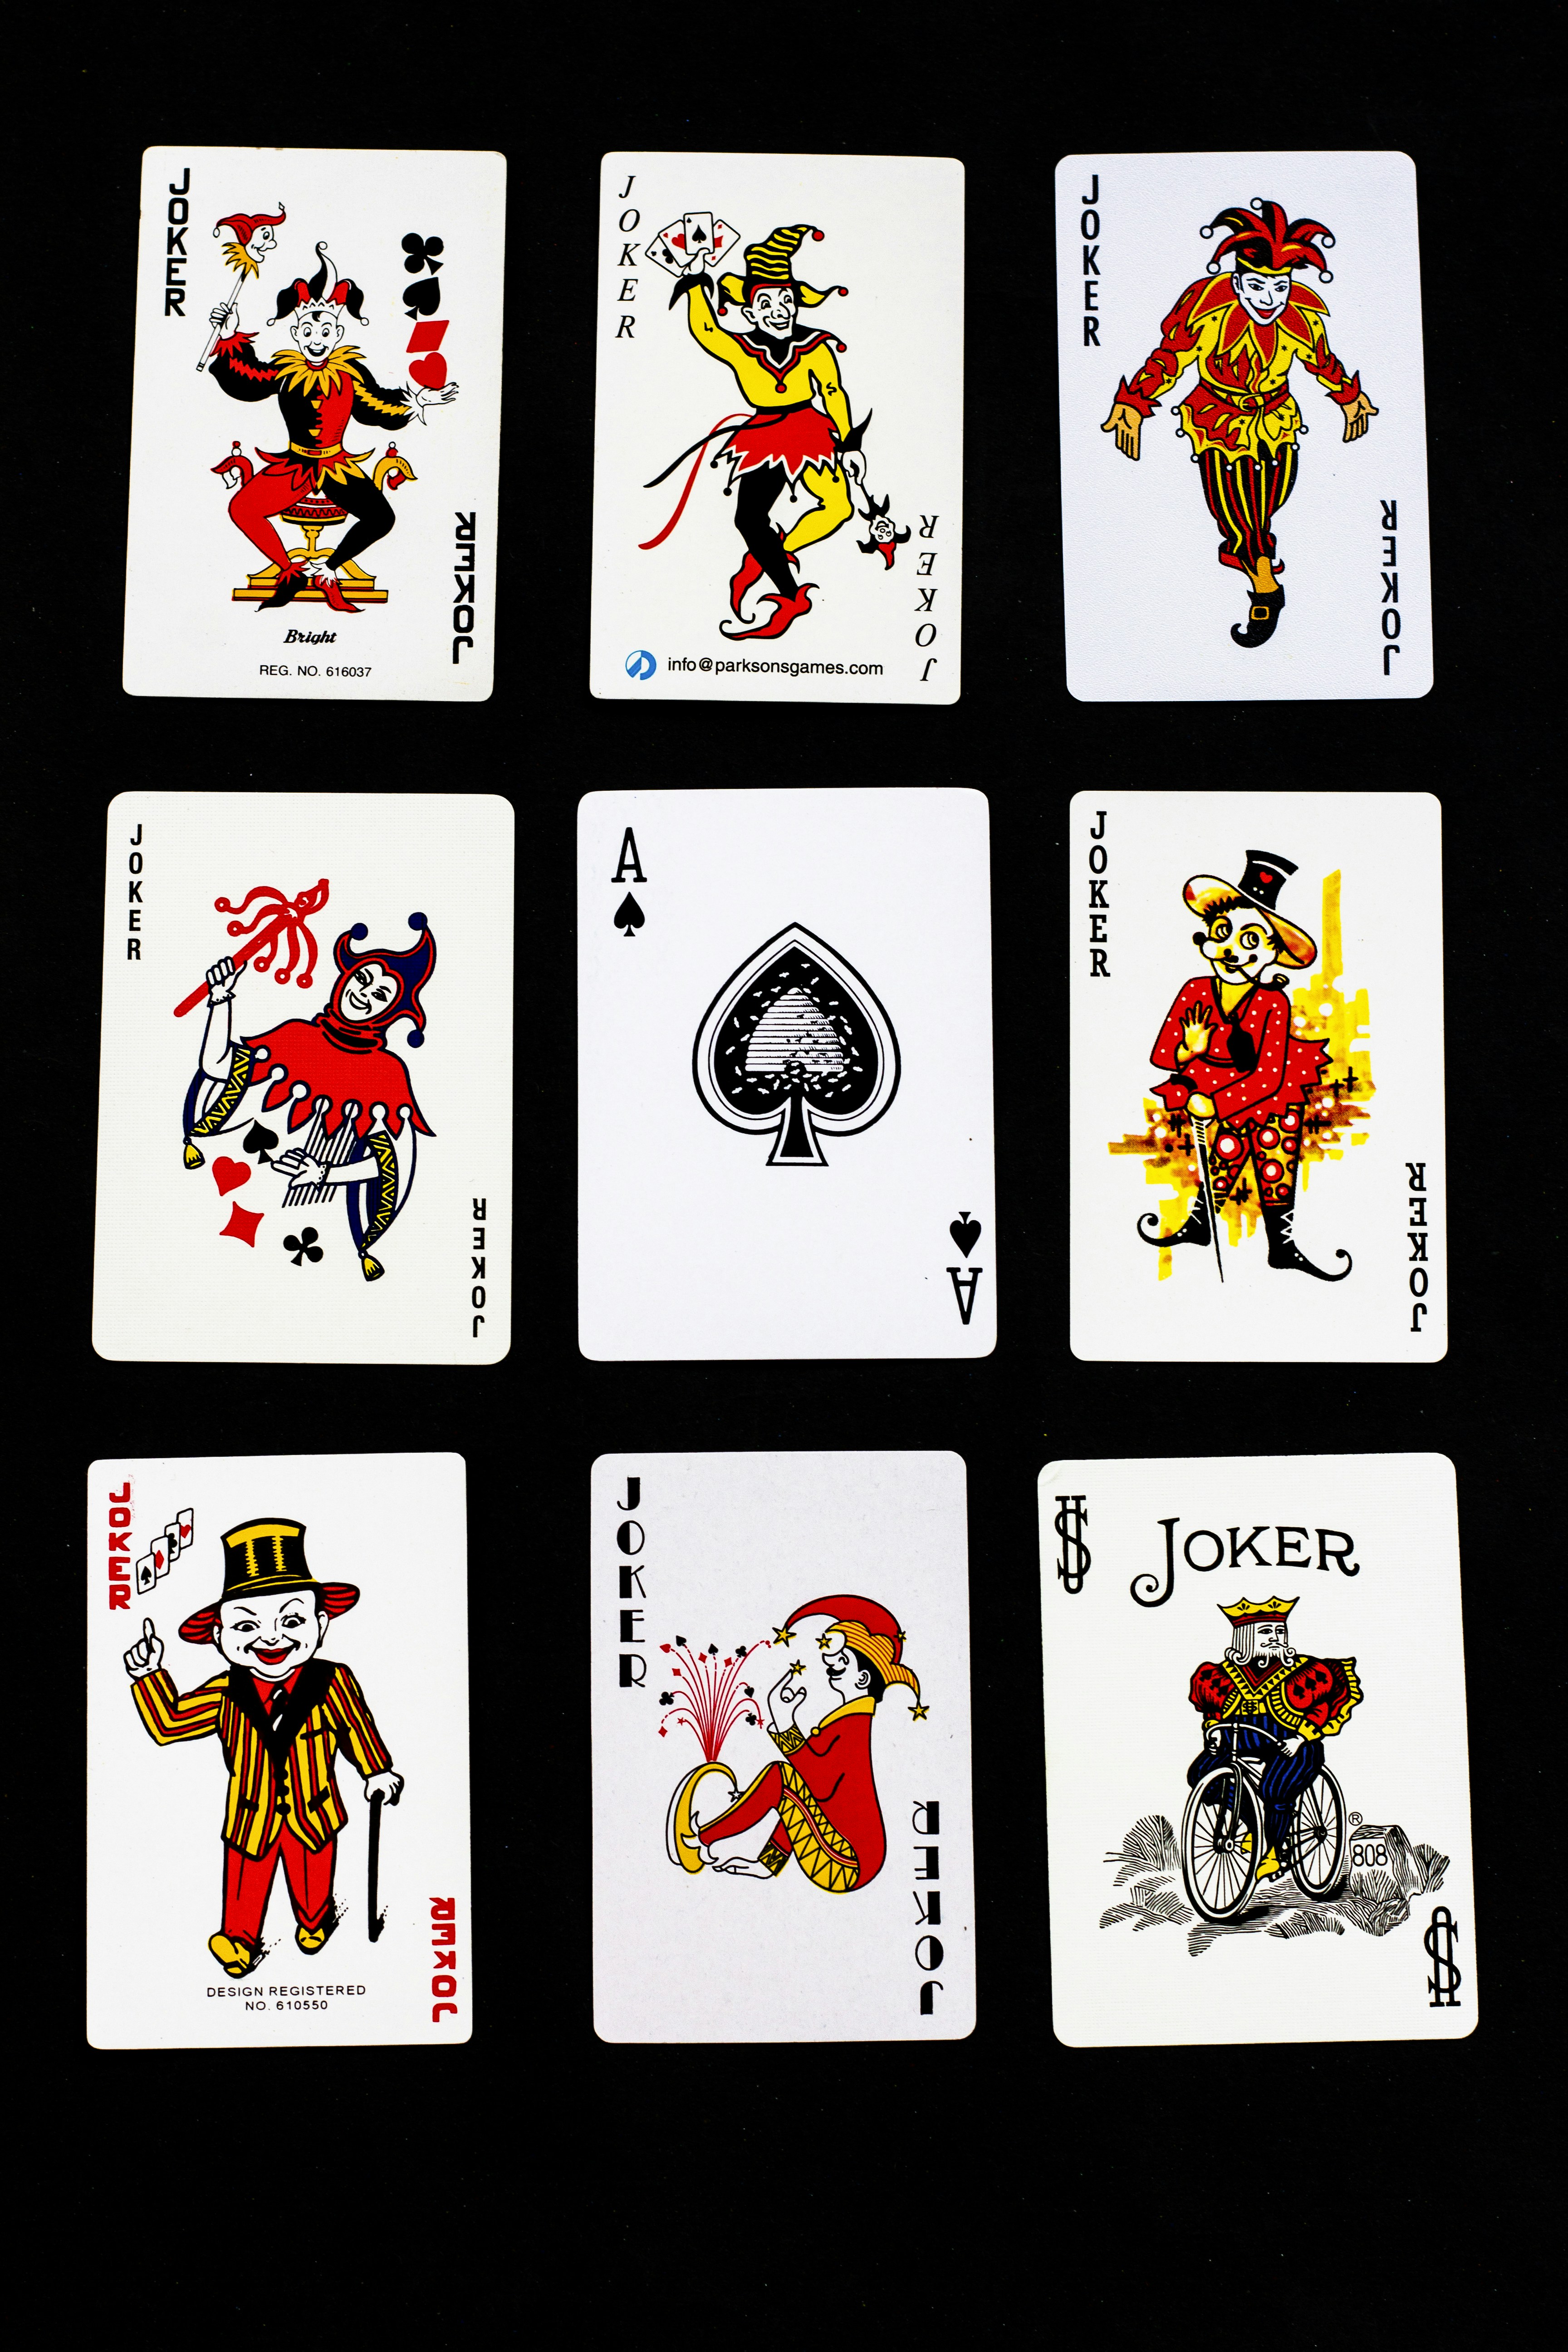 number of joker playing cards laid on a surface